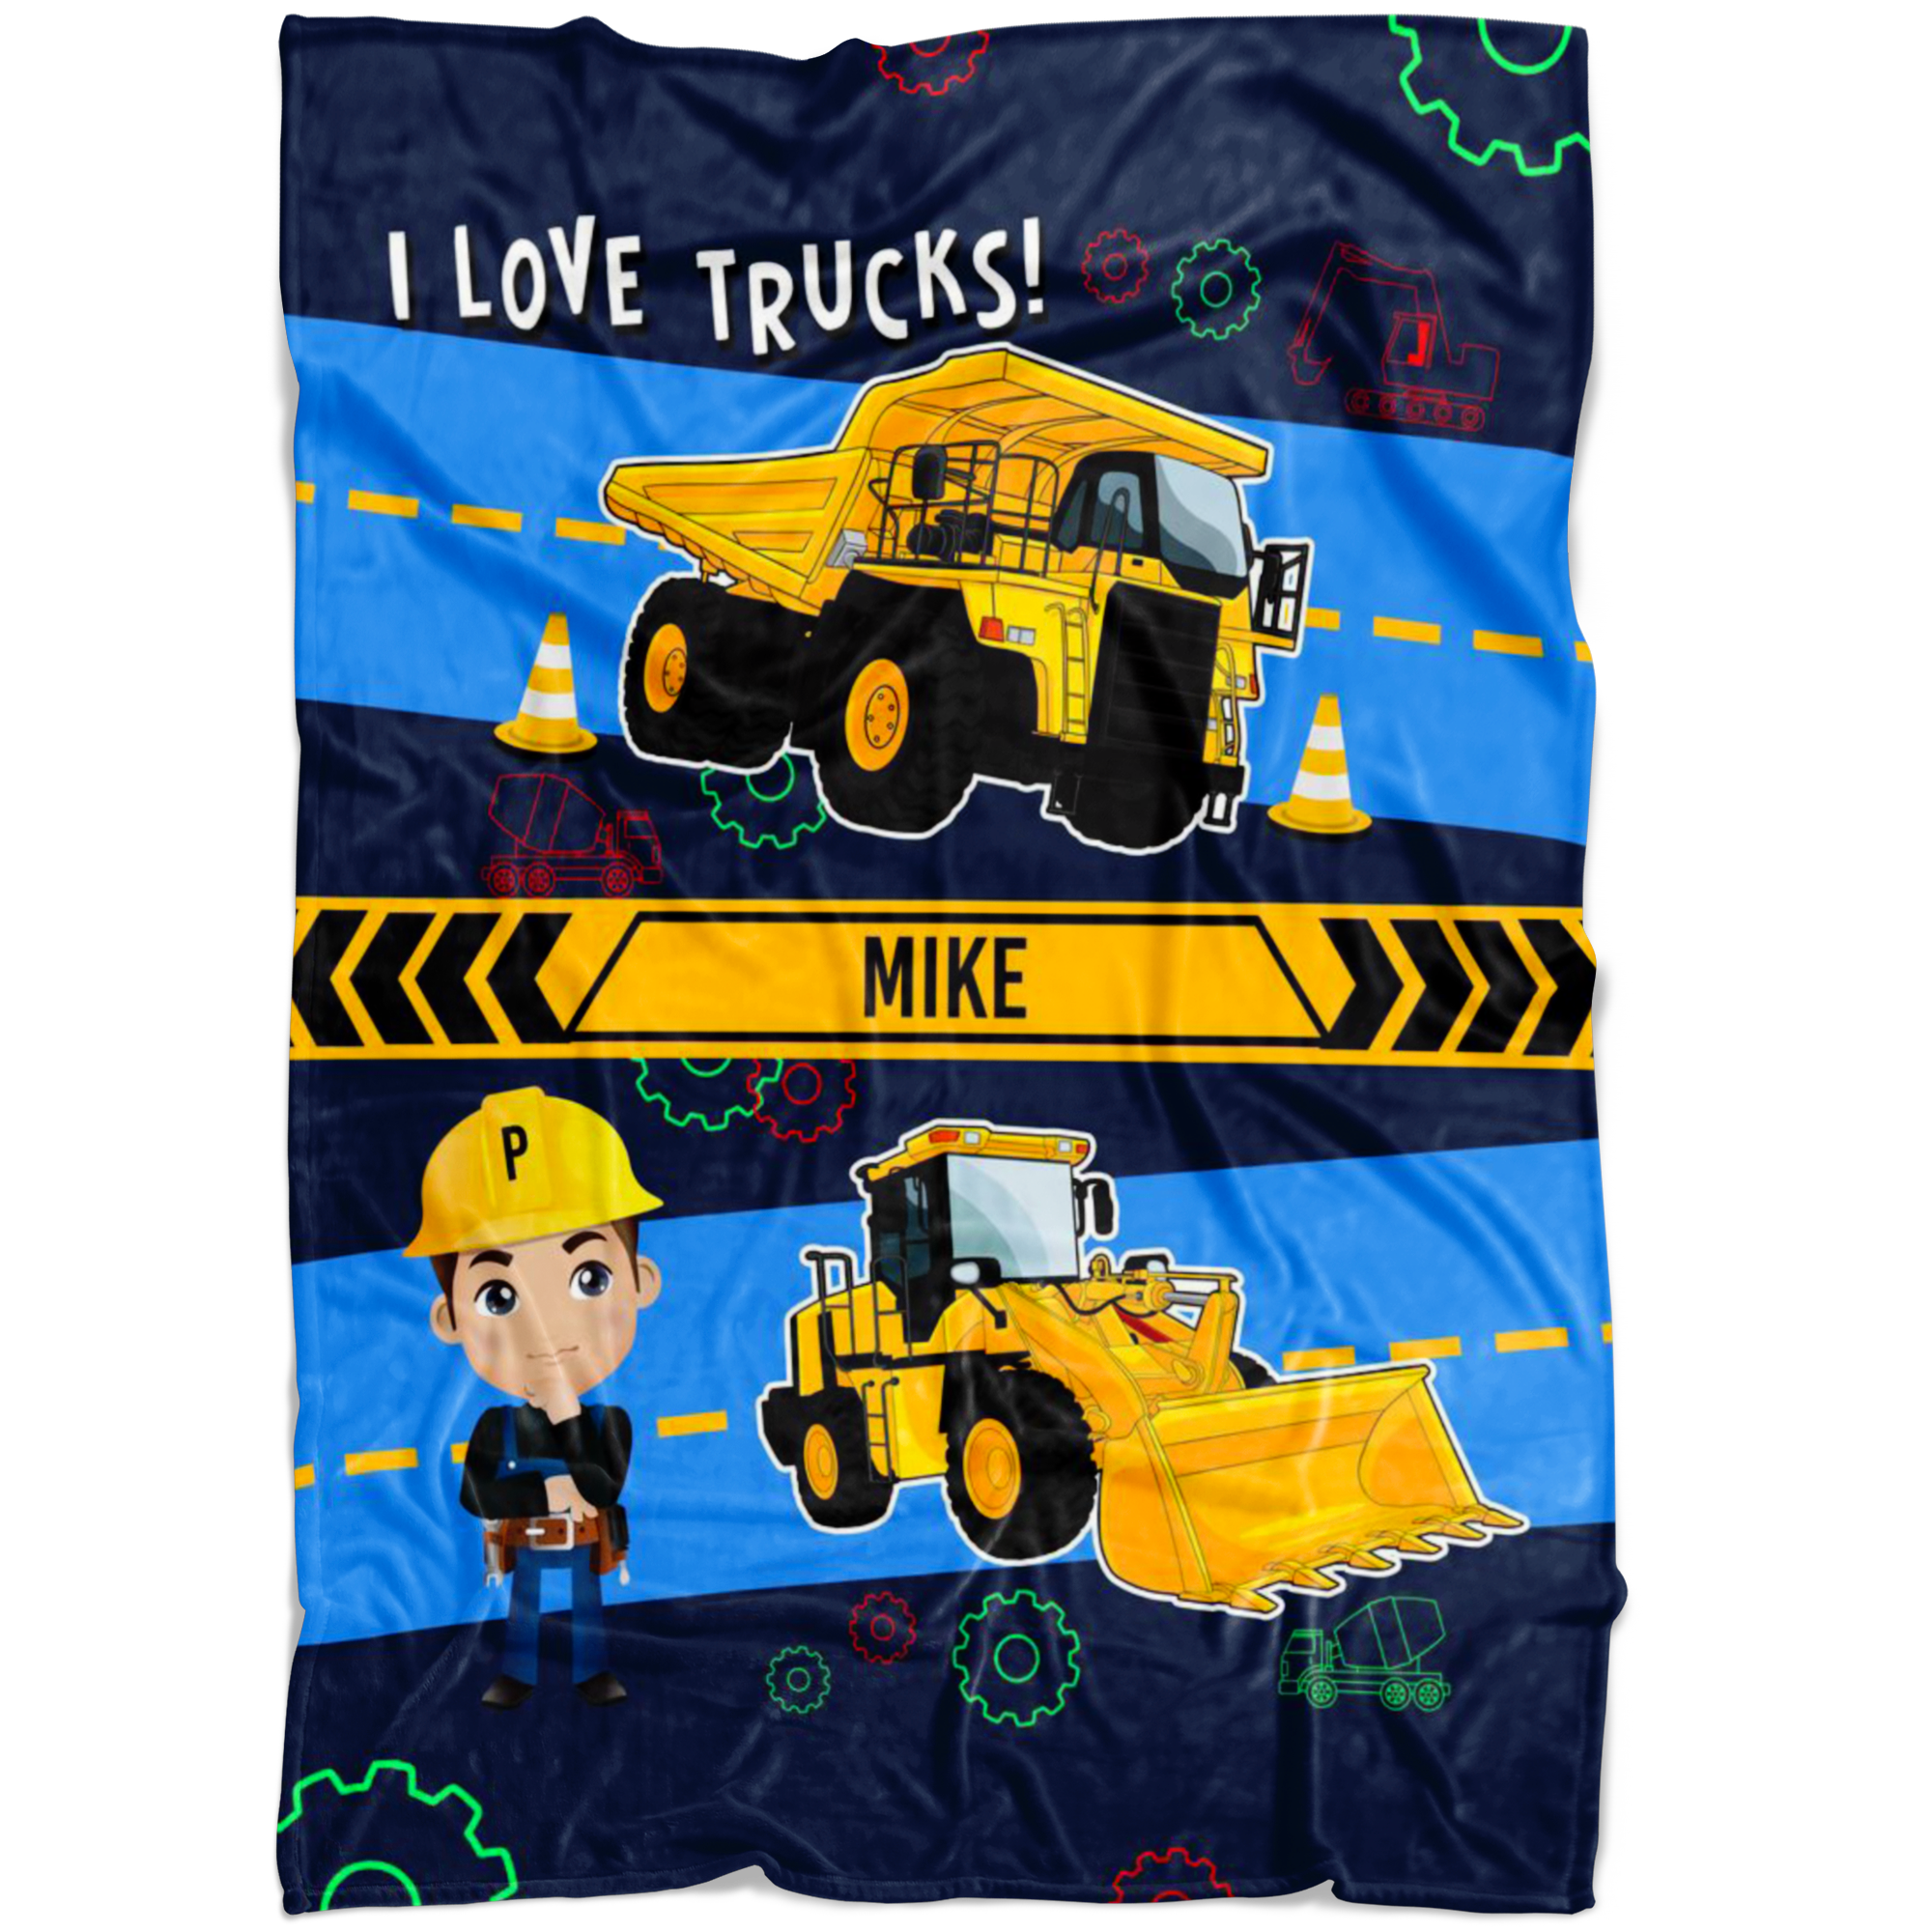 Personalized Name I Love Trucks Blanket for Boys & Girls with Character Personalization - Mike